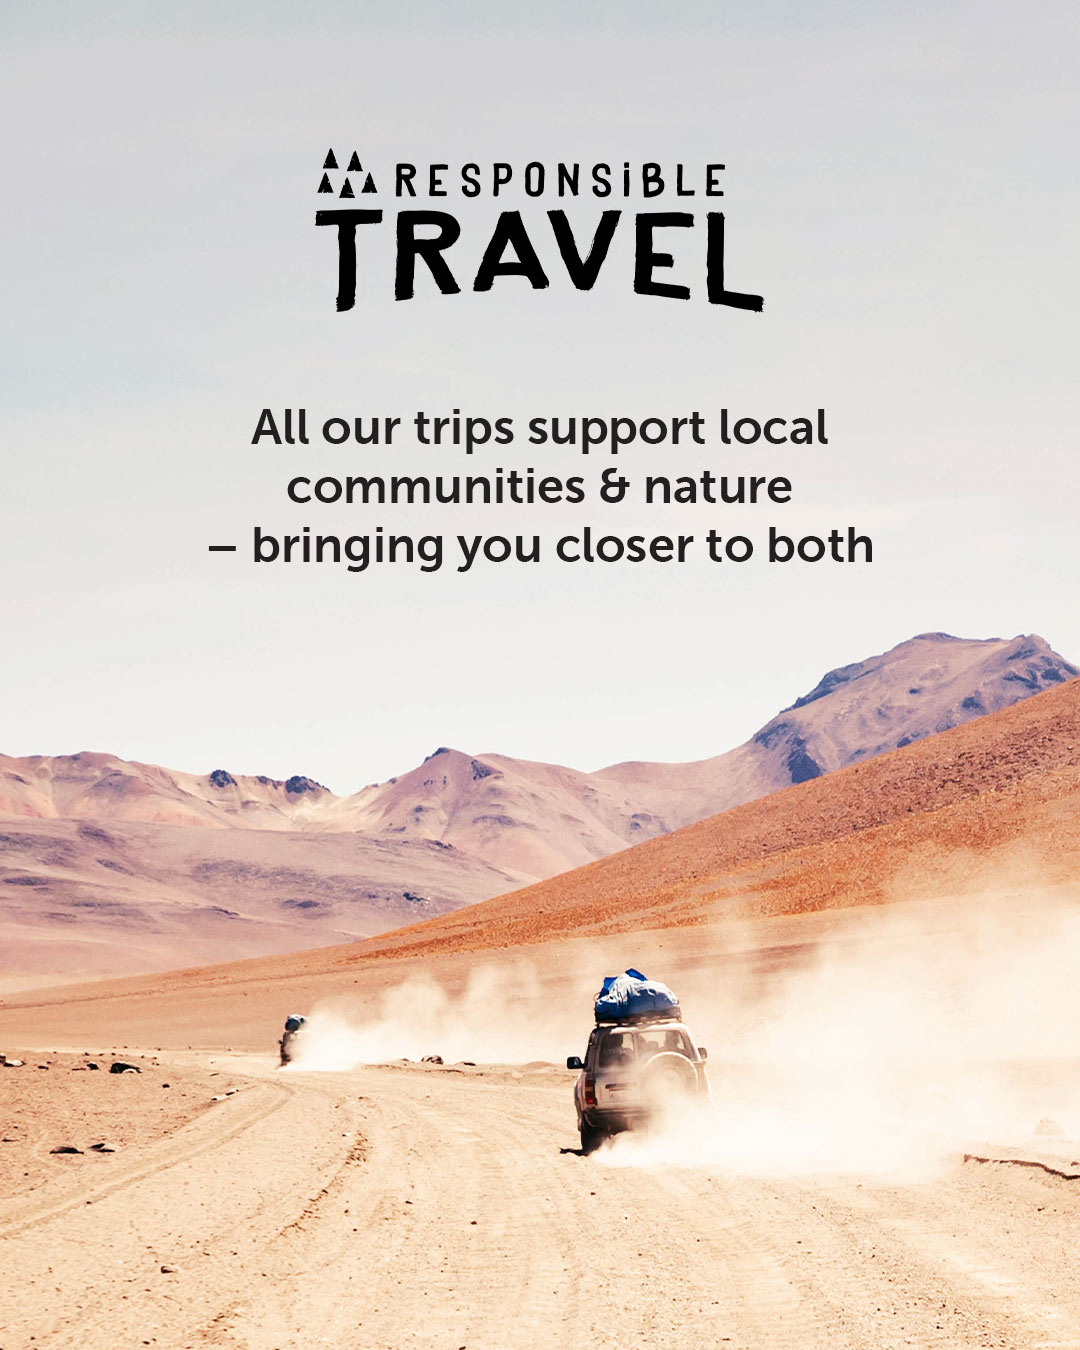 Quote: All our holidays support local communities & nature – bringing you closer to both